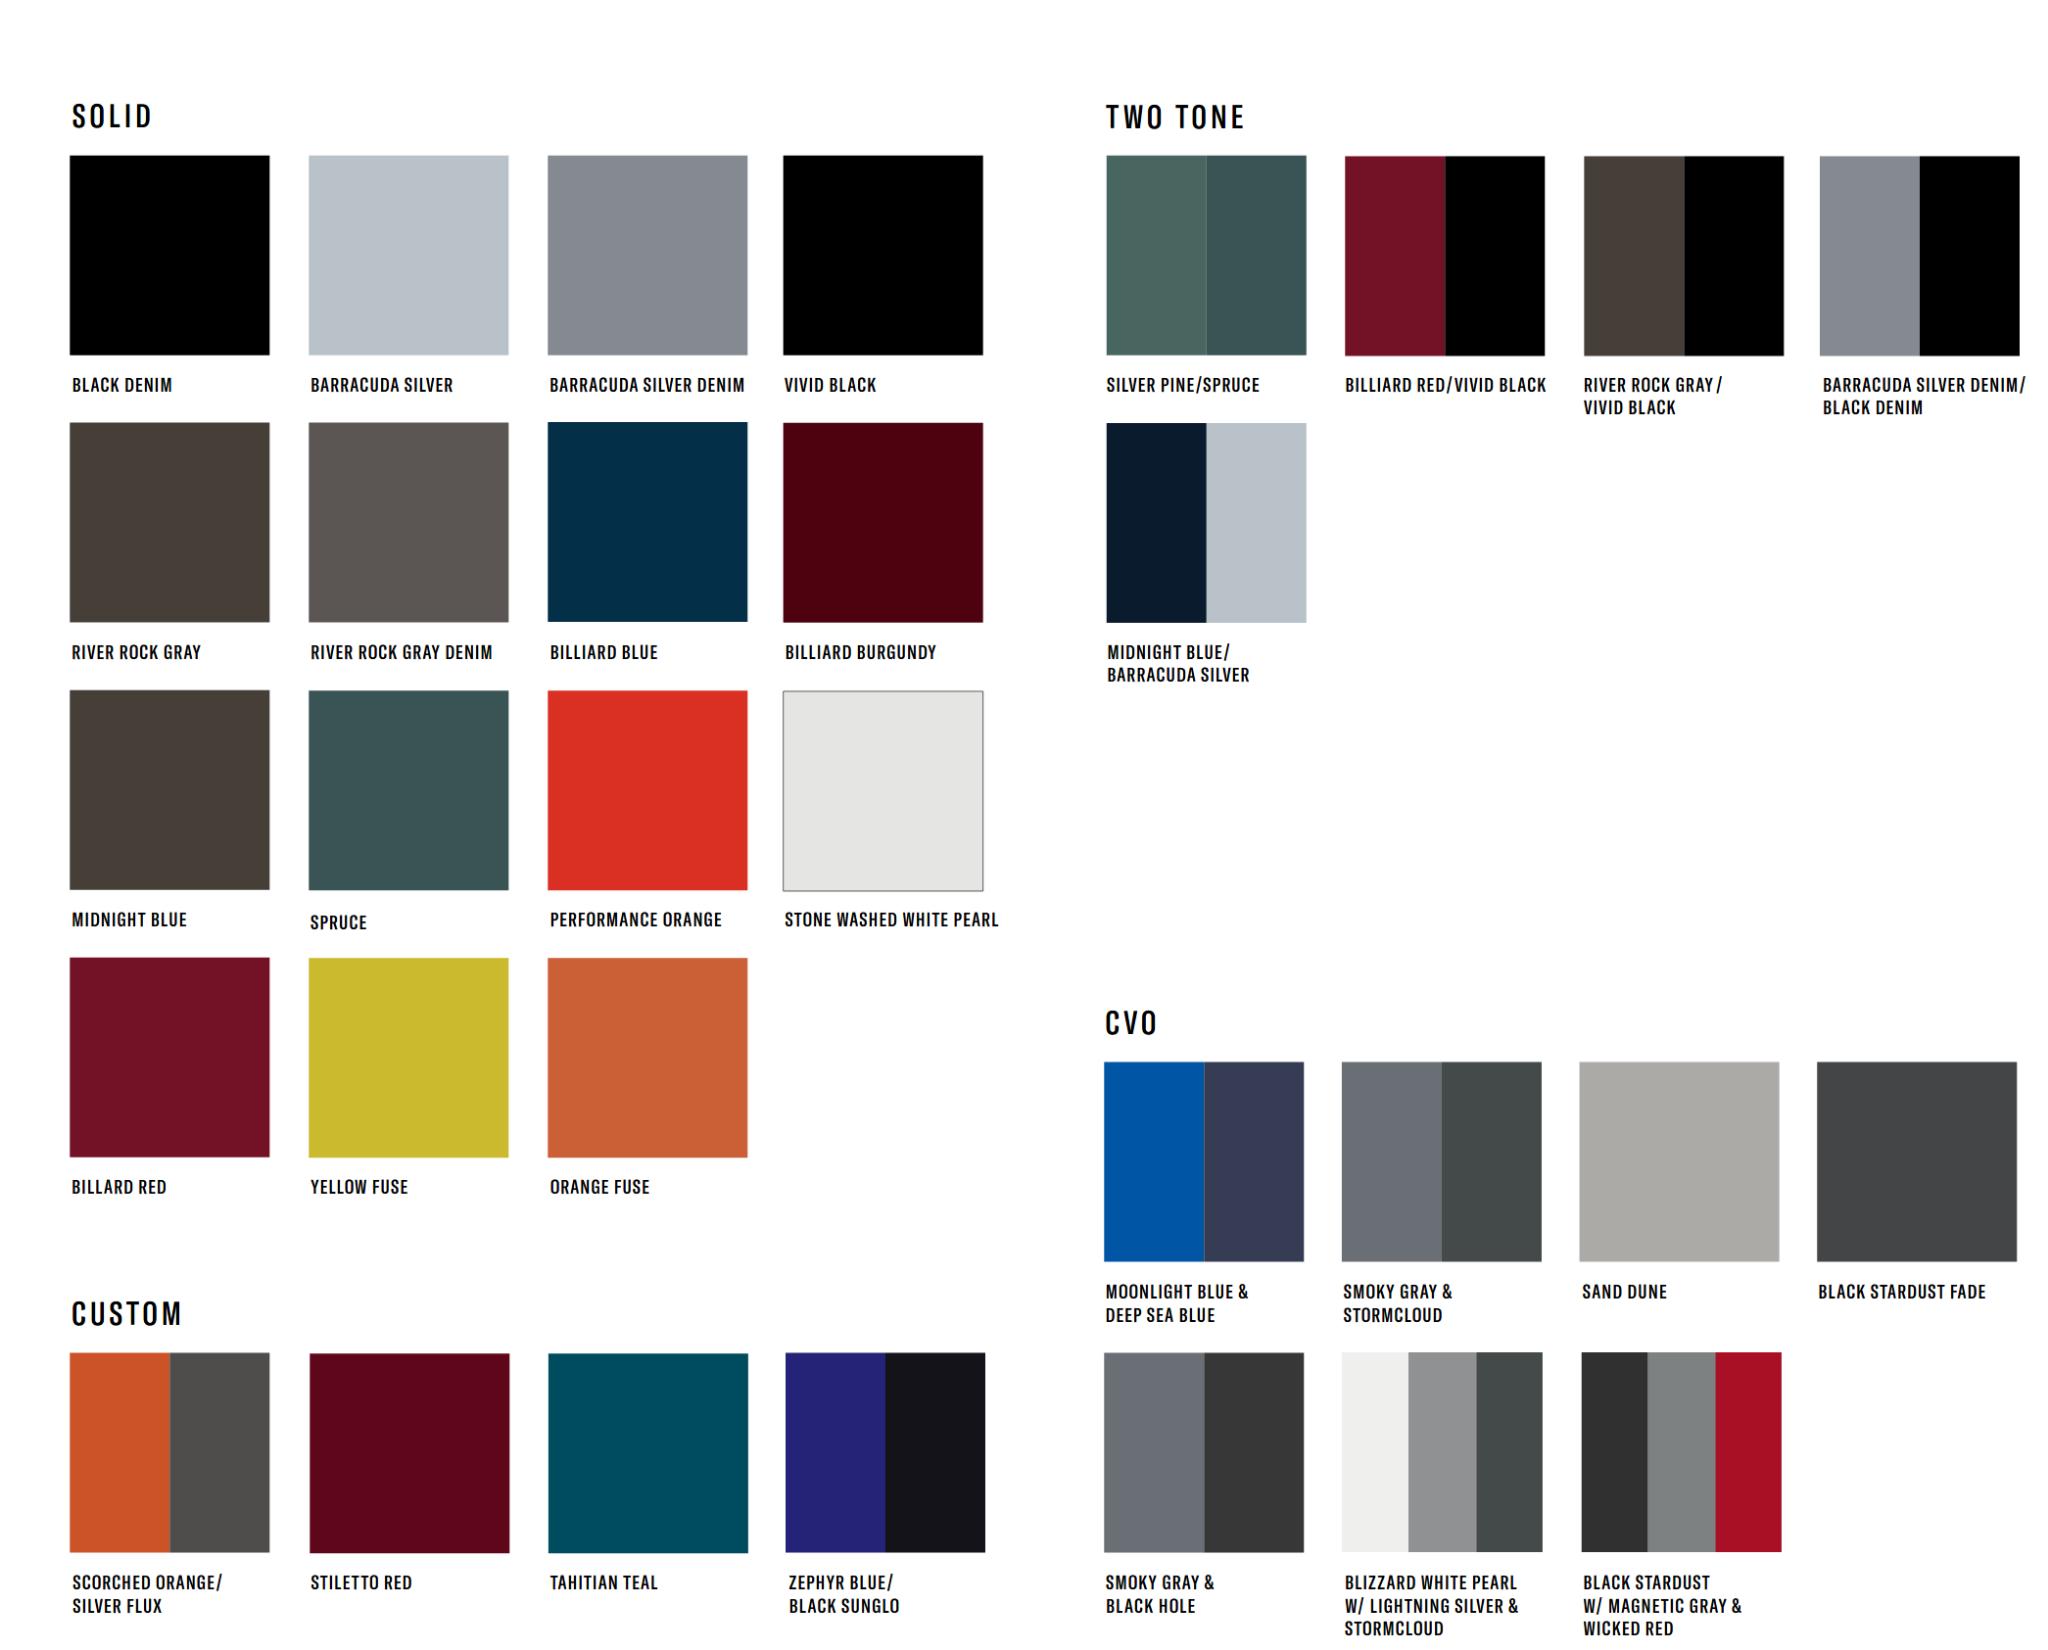 Exterior Colors used on Harley in 2020